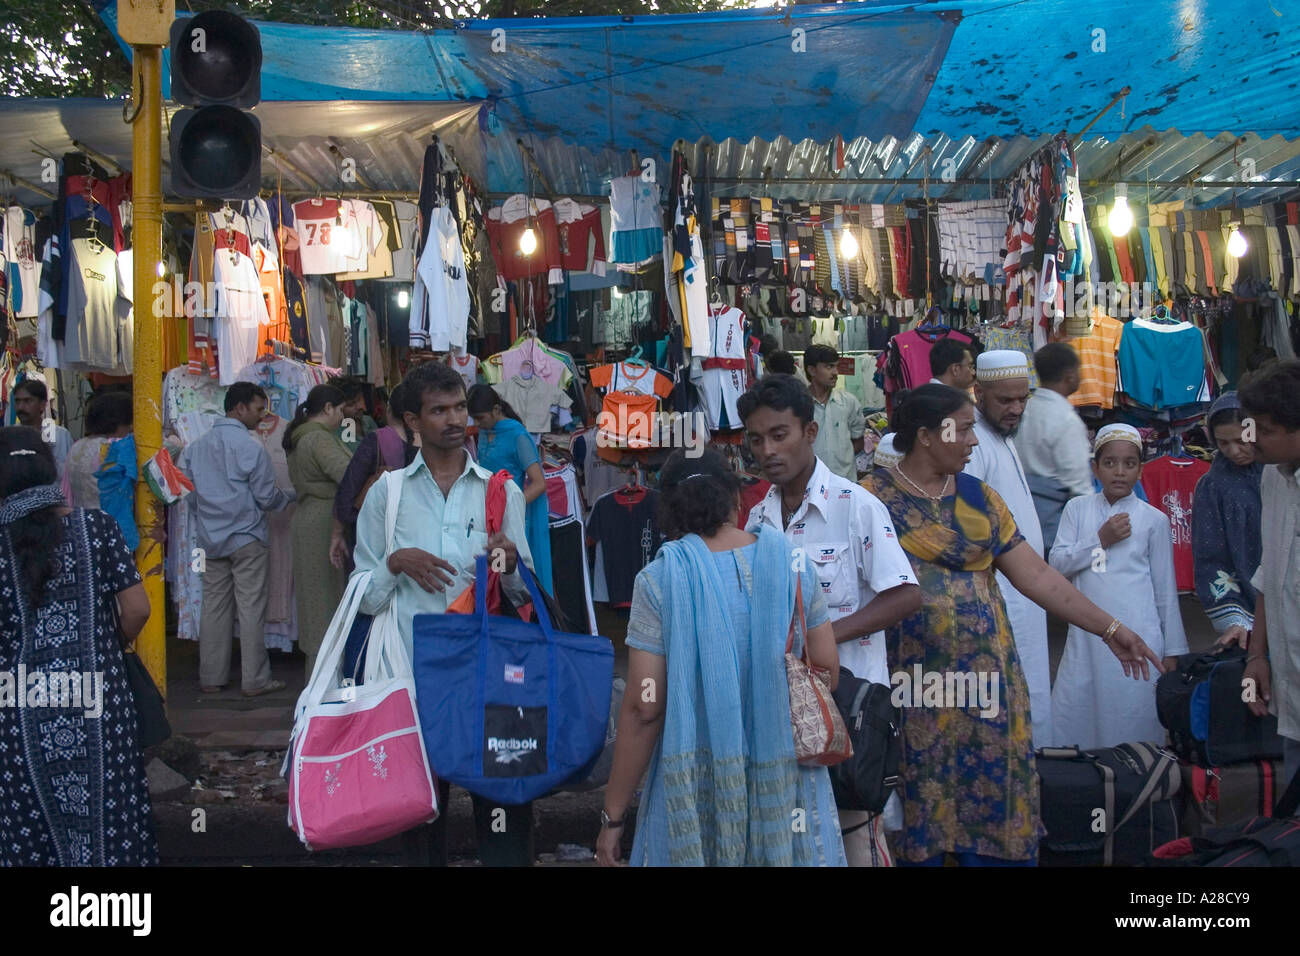 RSC76707 Fashion street man selling bags on the road Bombay India Stock Photo